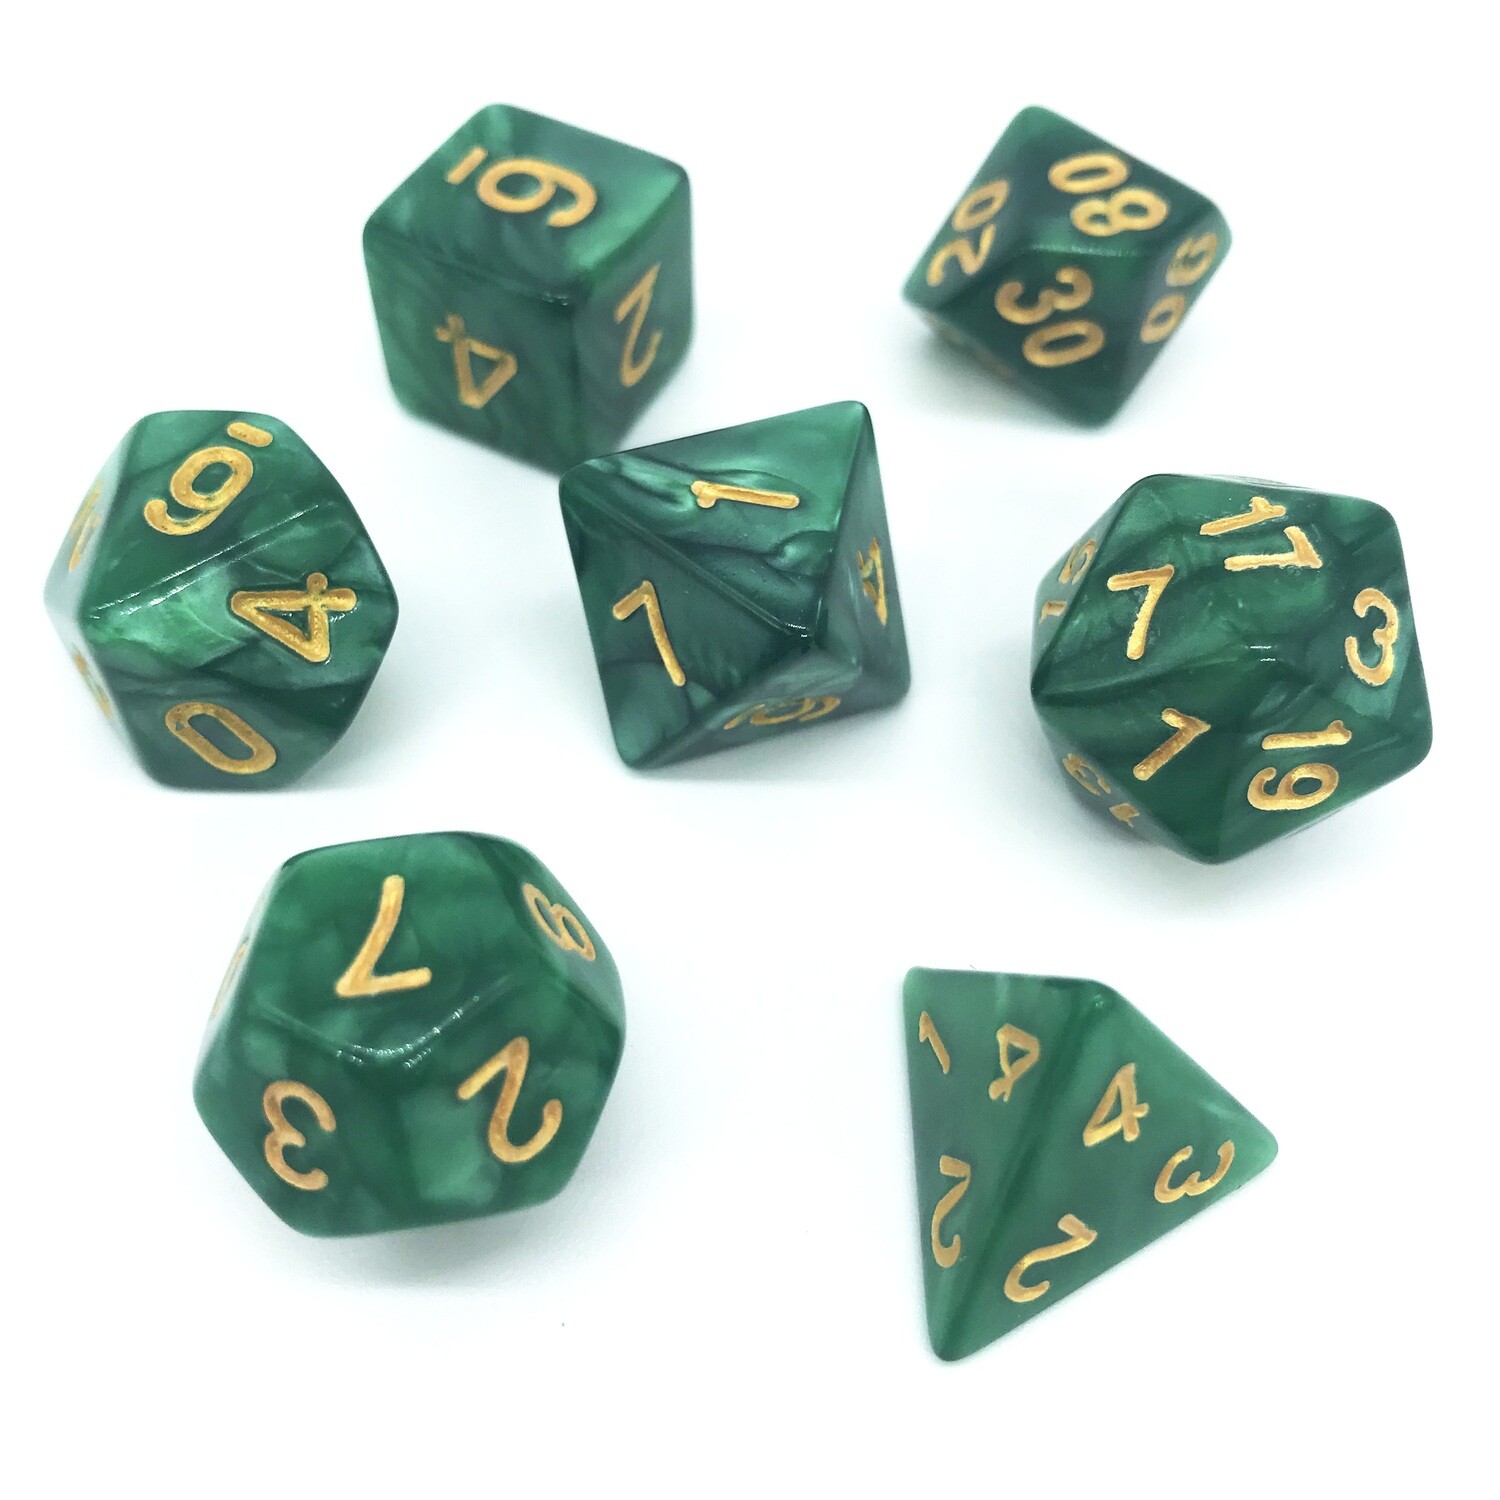 Dice Set - Dark Green marbled with gold numbers